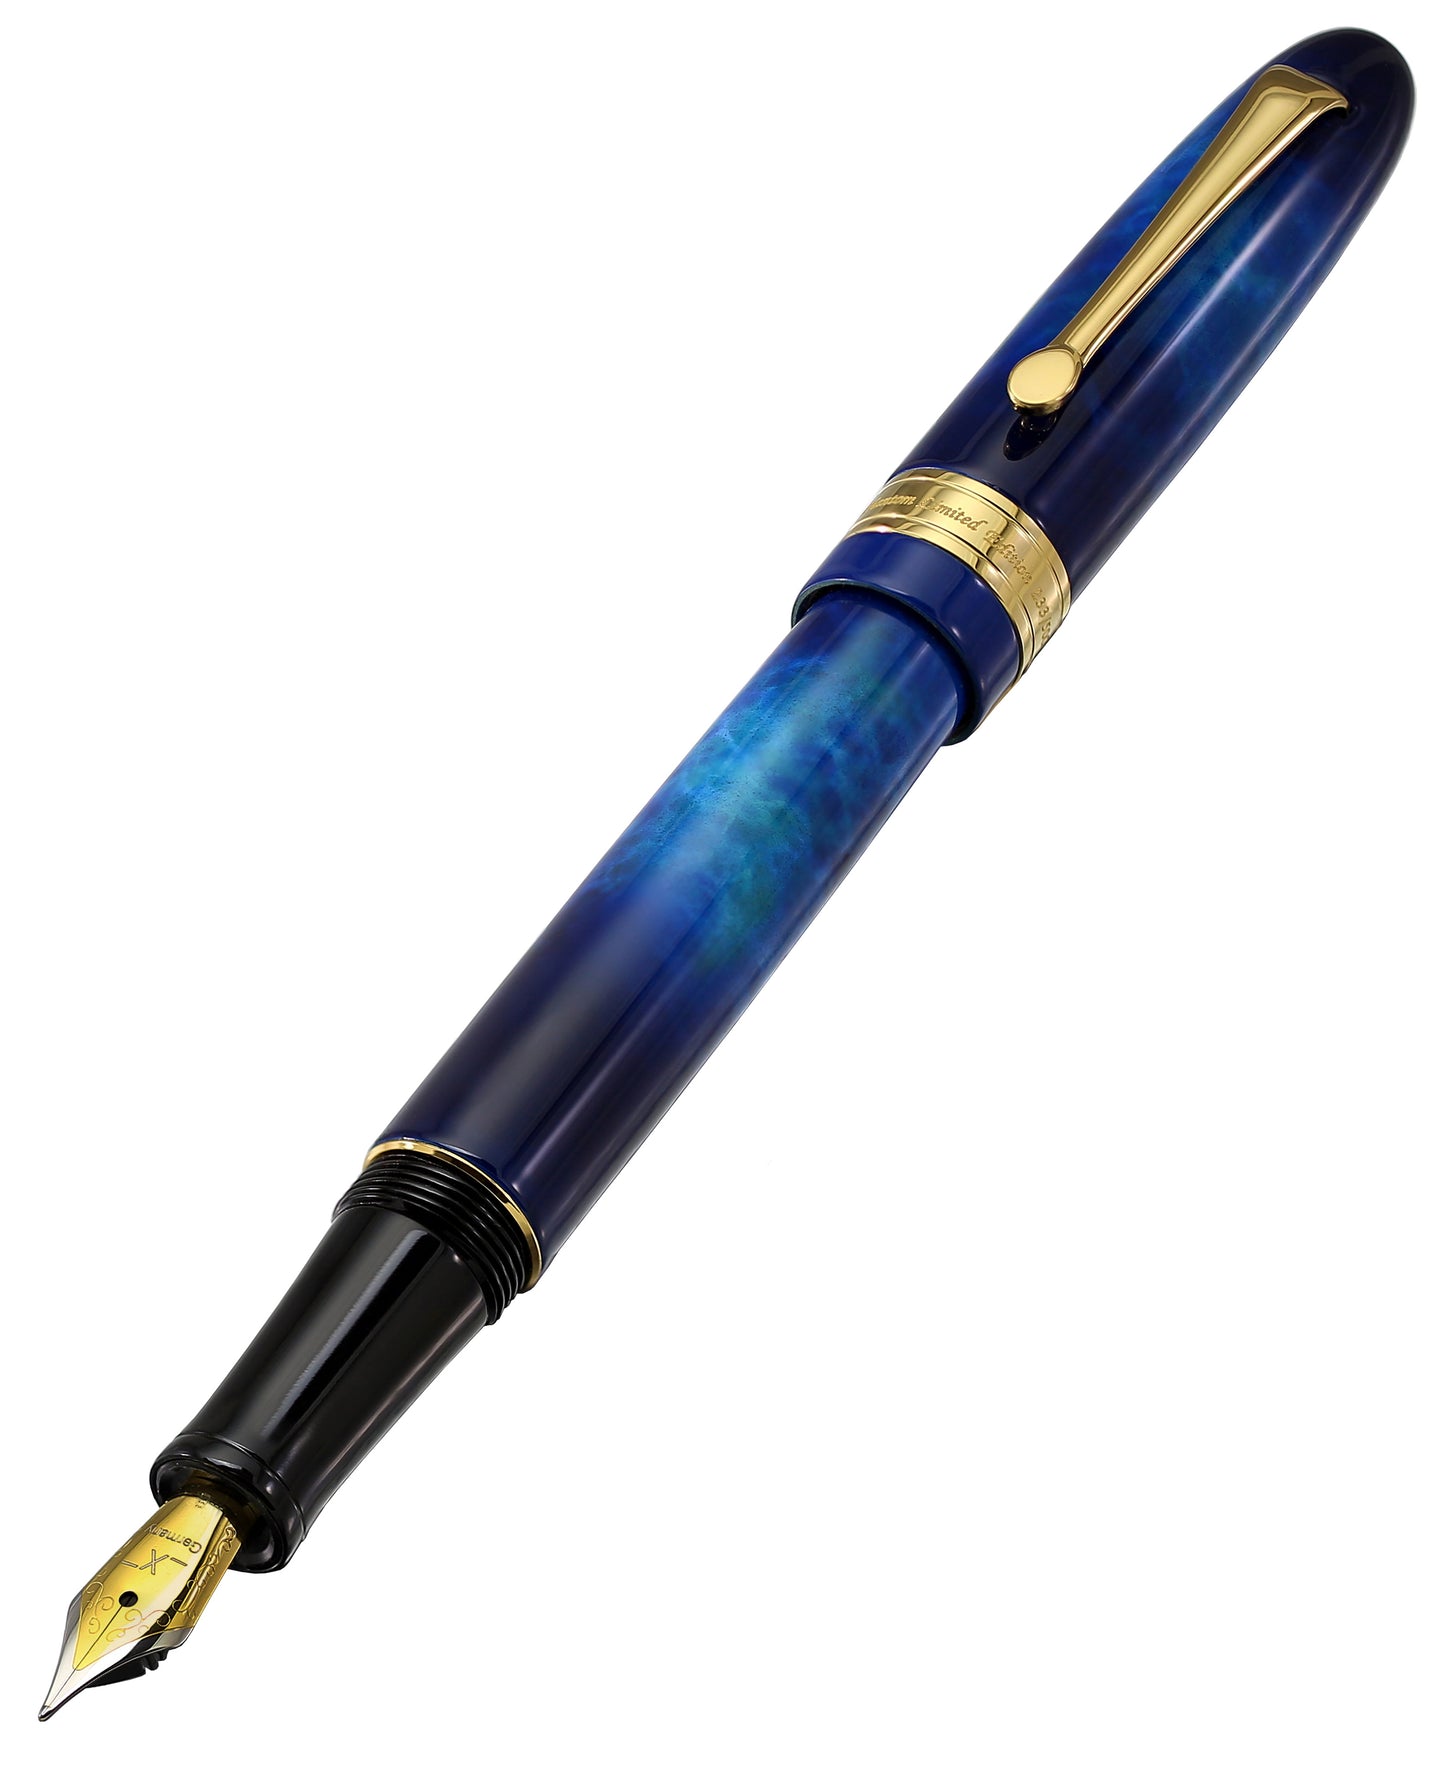 Xezo - Angled 3D view of the front of the Phantom Stardust FM fountain pen